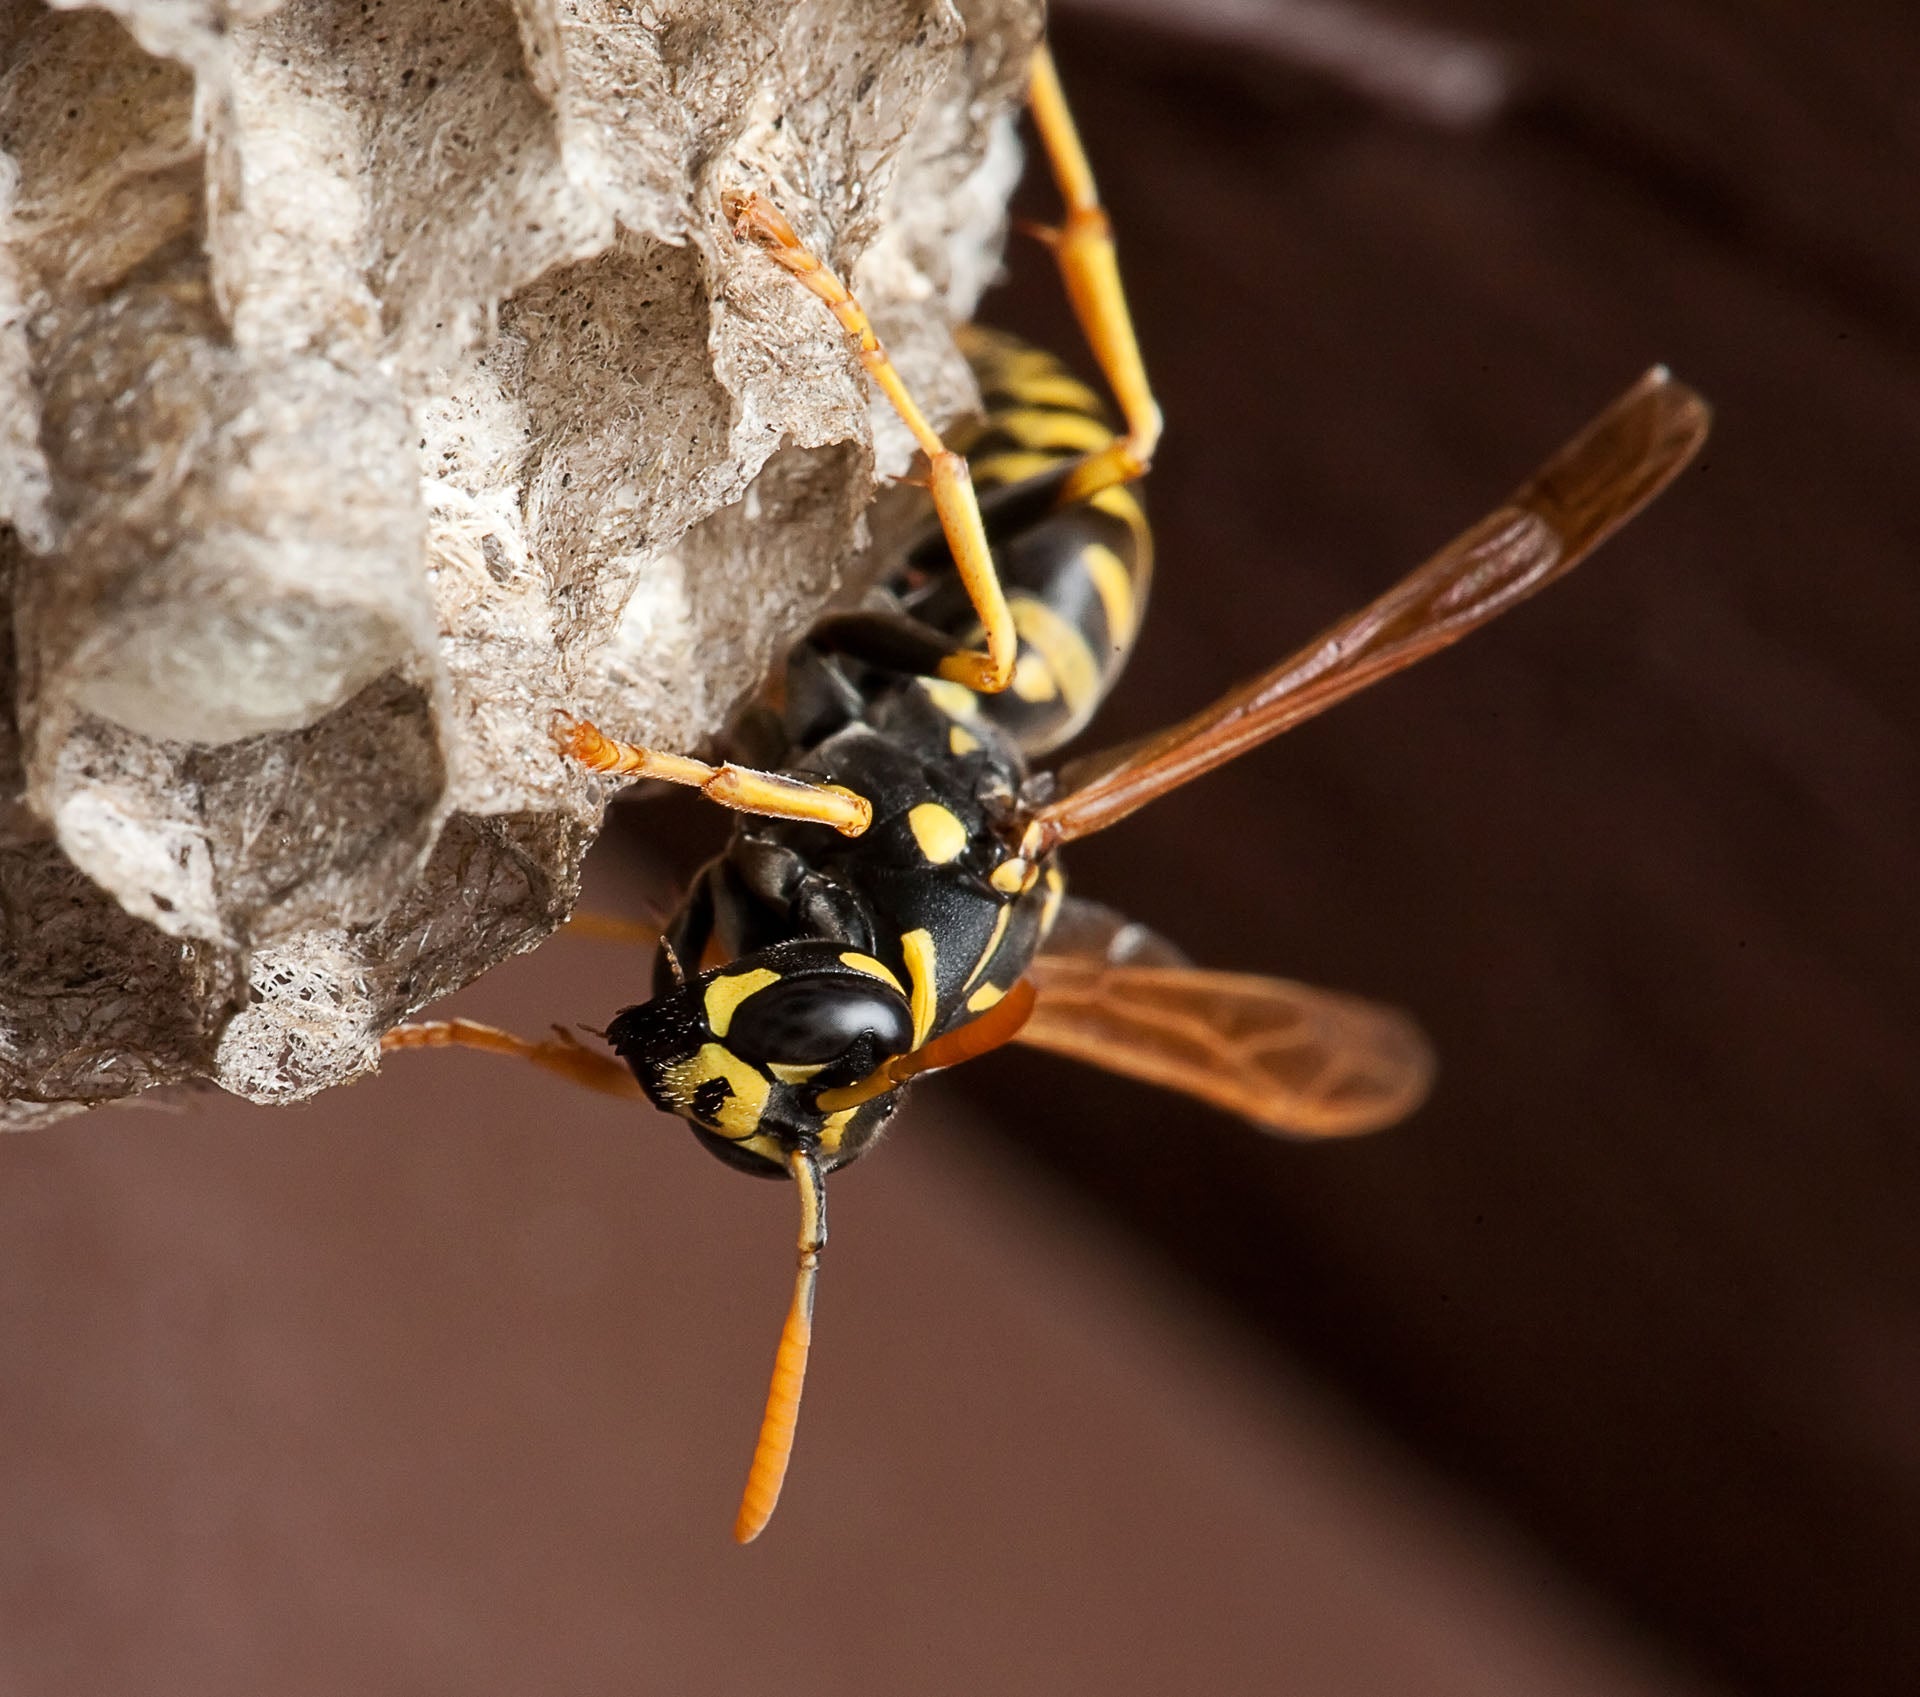 Professional Wasp Control Products